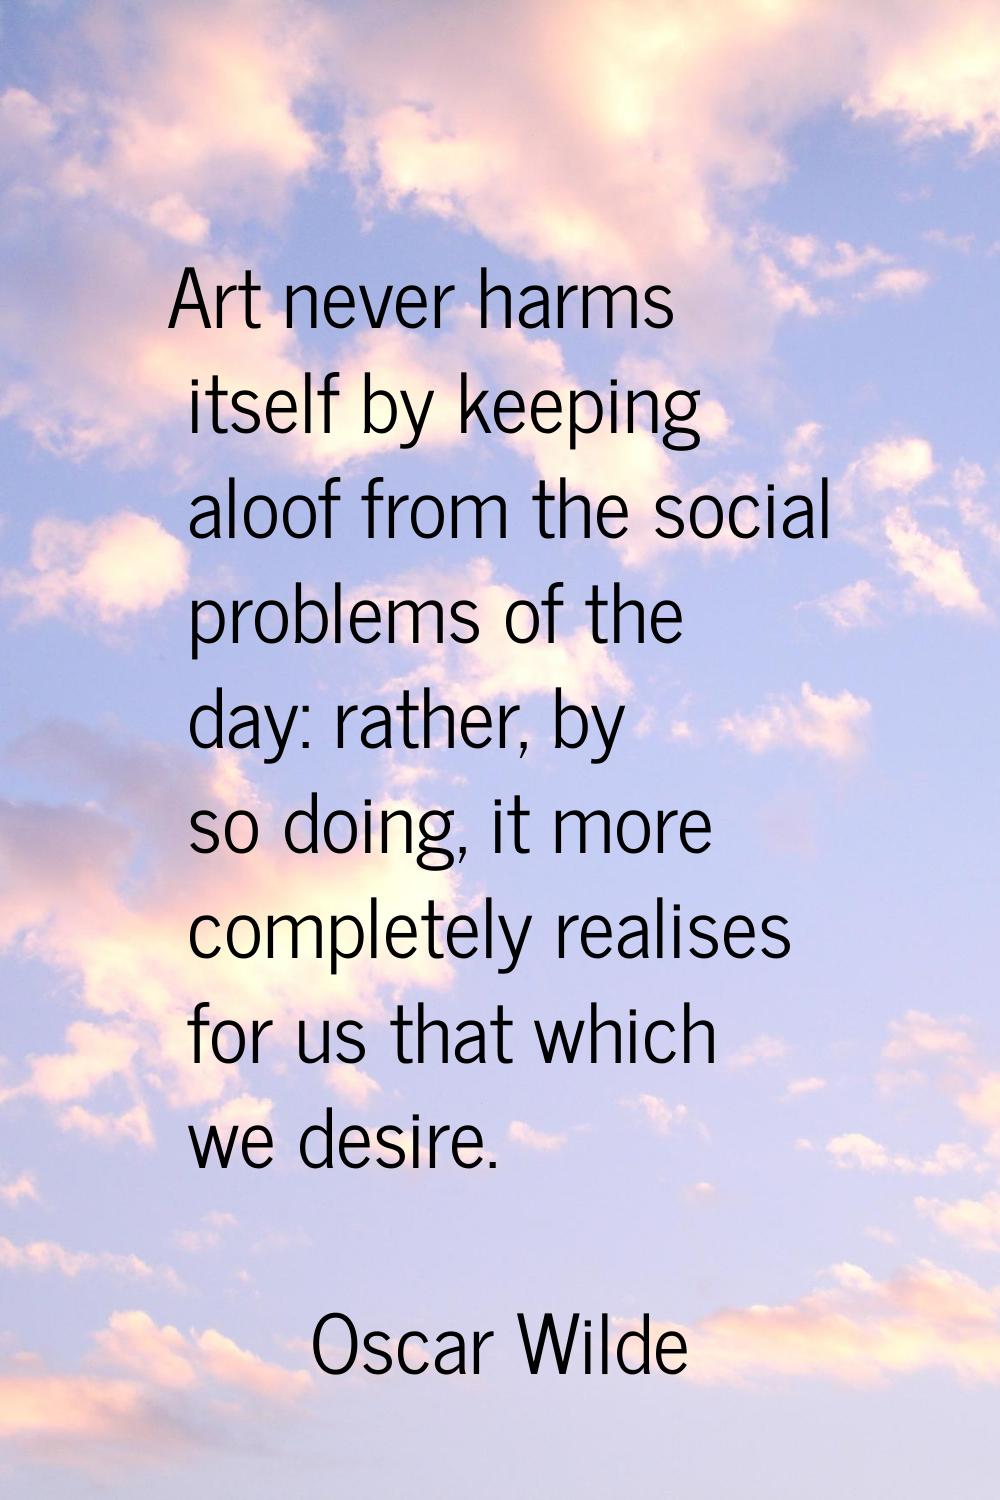 Art never harms itself by keeping aloof from the social problems of the day: rather, by so doing, i